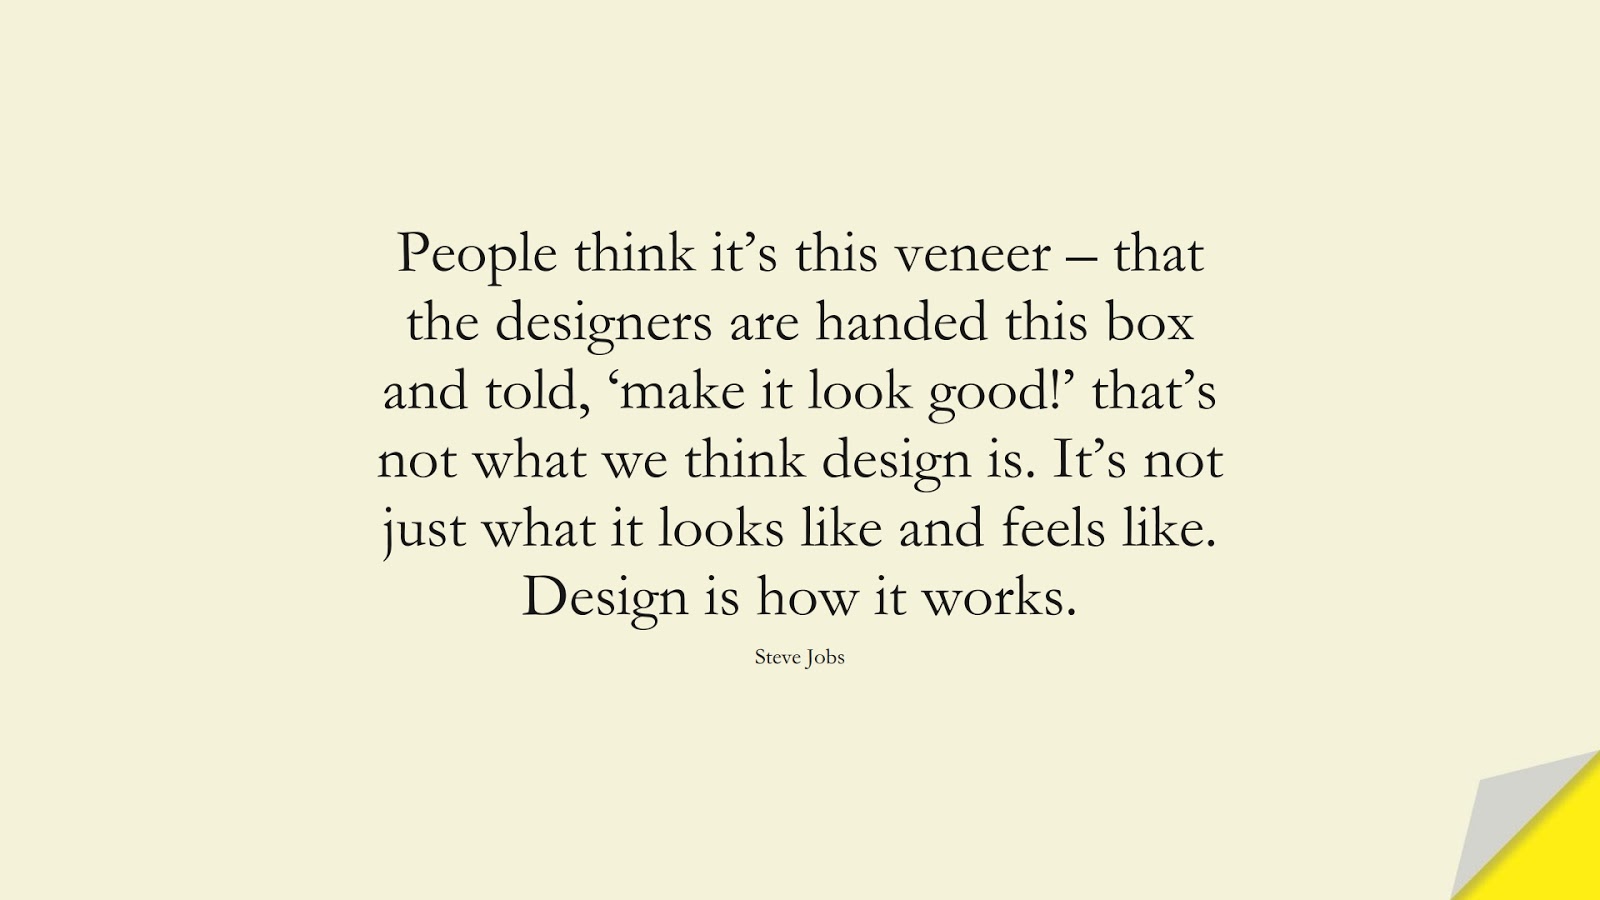 People think it’s this veneer – that the designers are handed this box and told, ‘make it look good!’ that’s not what we think design is. It’s not just what it looks like and feels like. Design is how it works. (Steve Jobs);  #SteveJobsQuotes